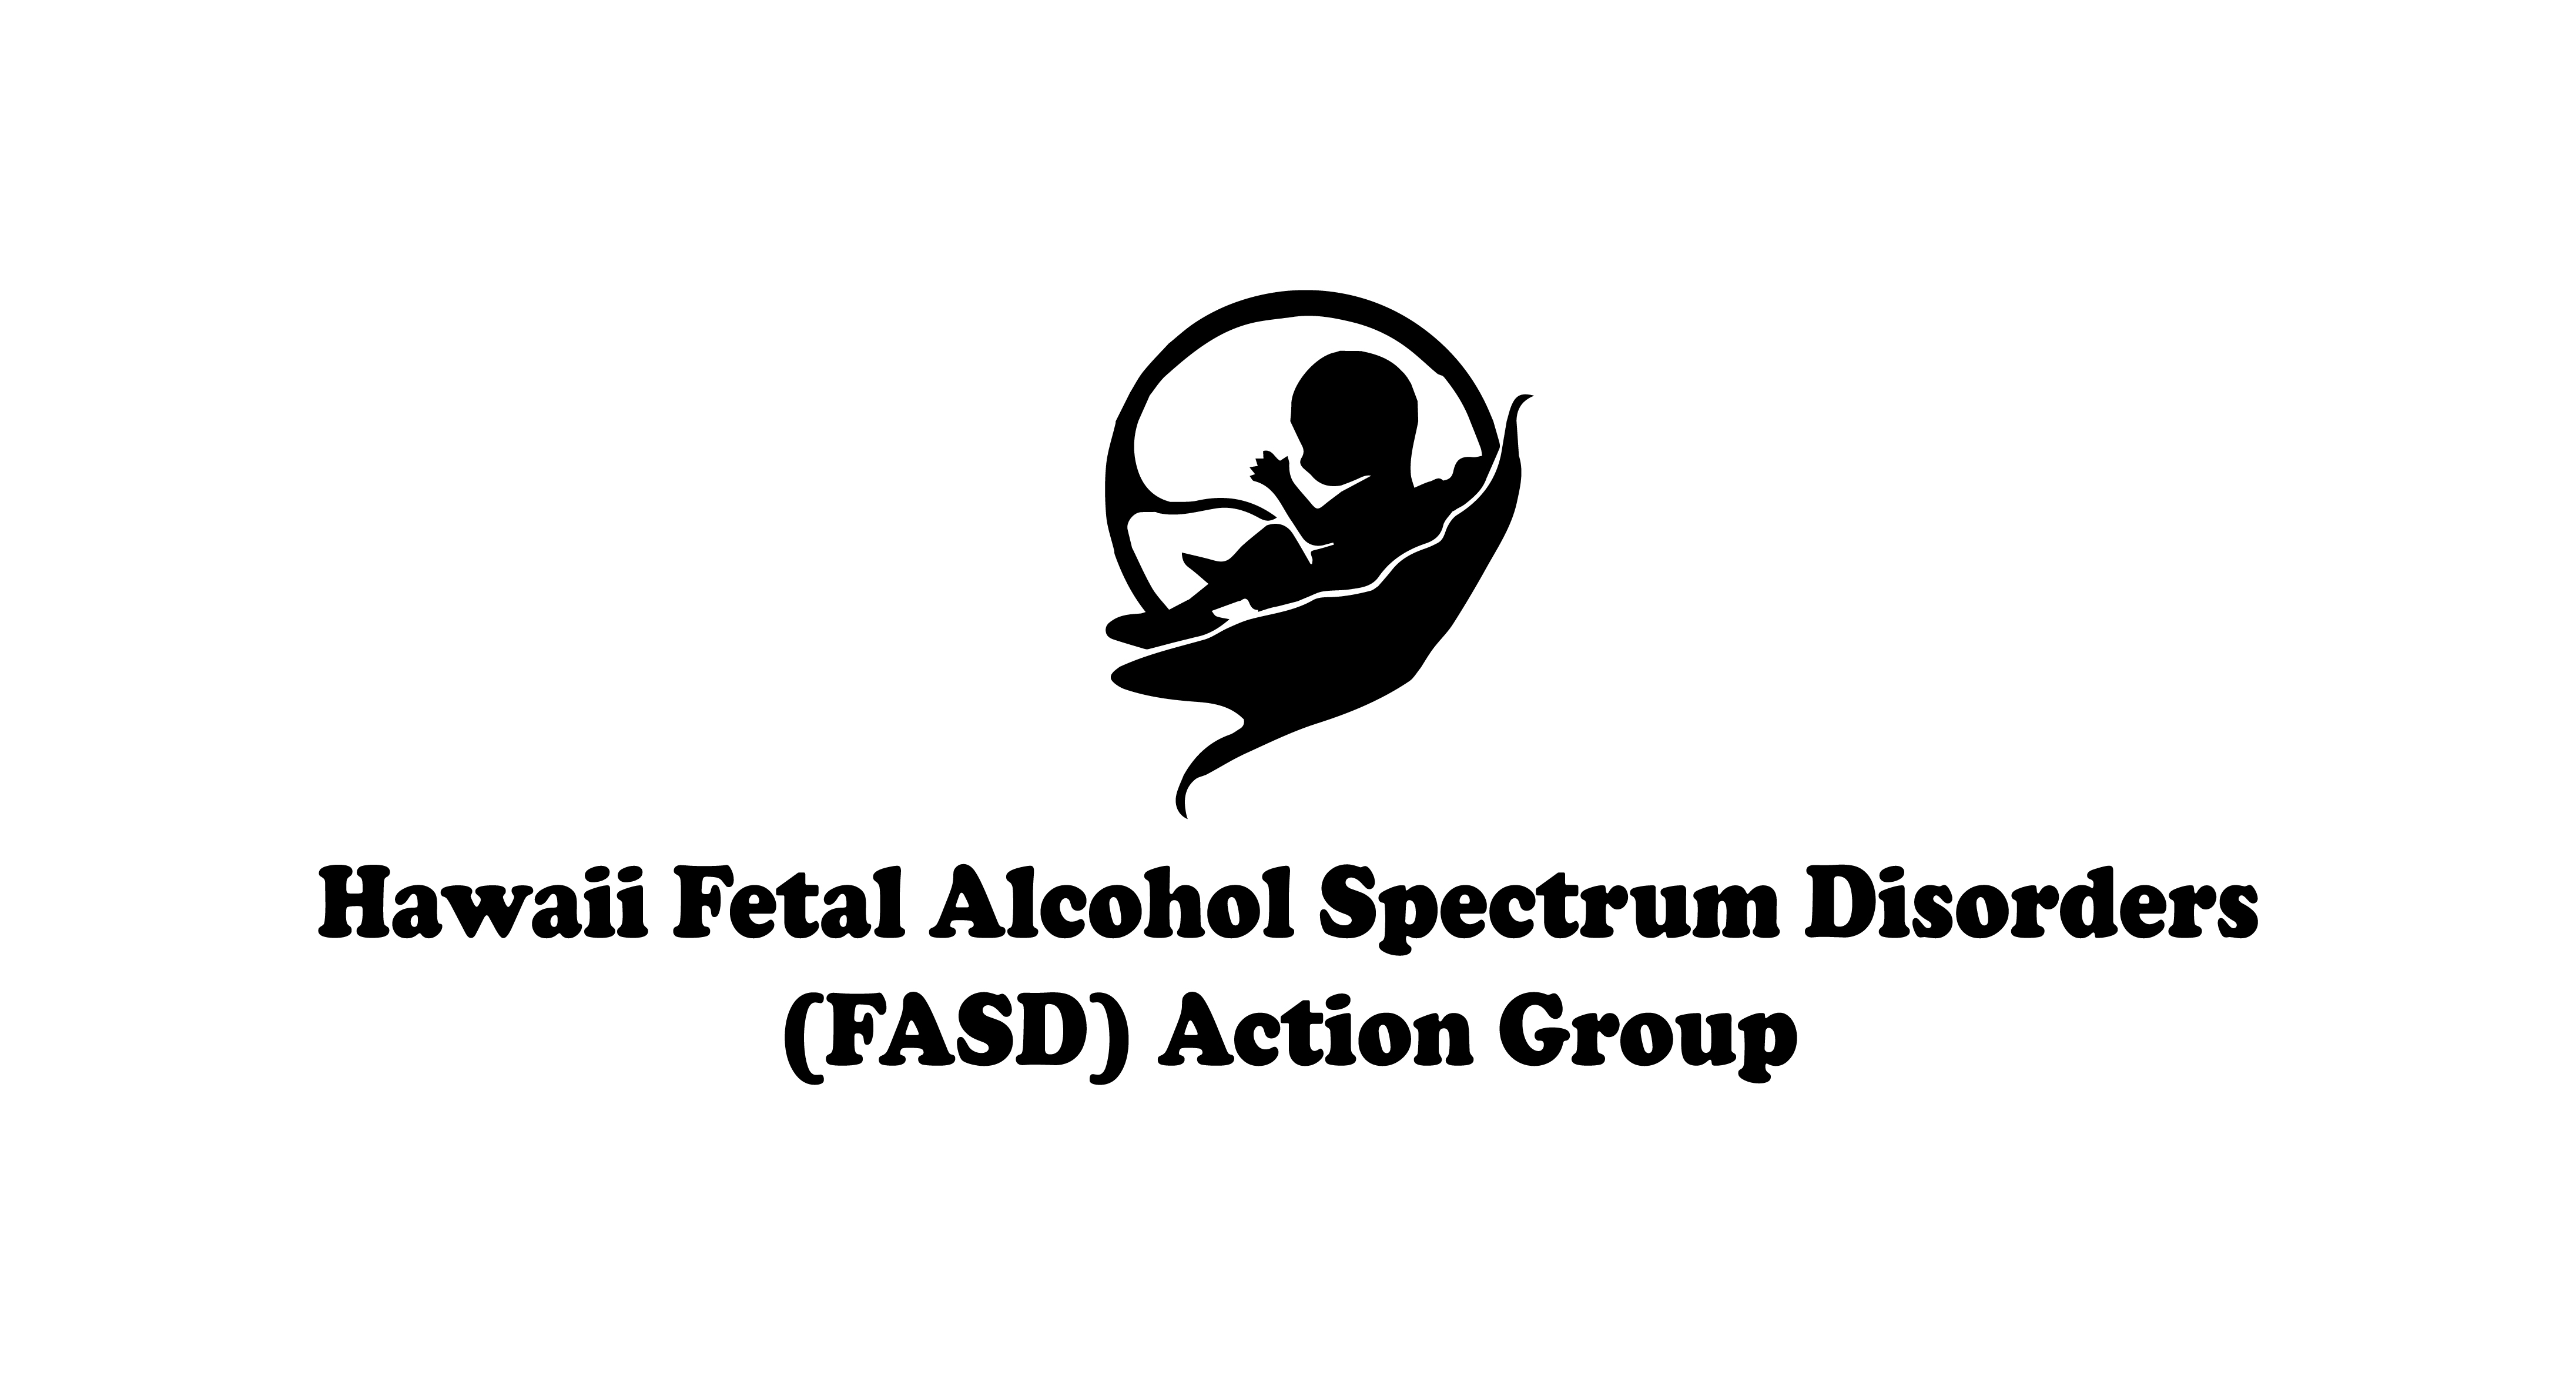 New Legislation Will Help Children and Adults Living with FASD, the Nation’s Most Common and Preventable Developmental Disability